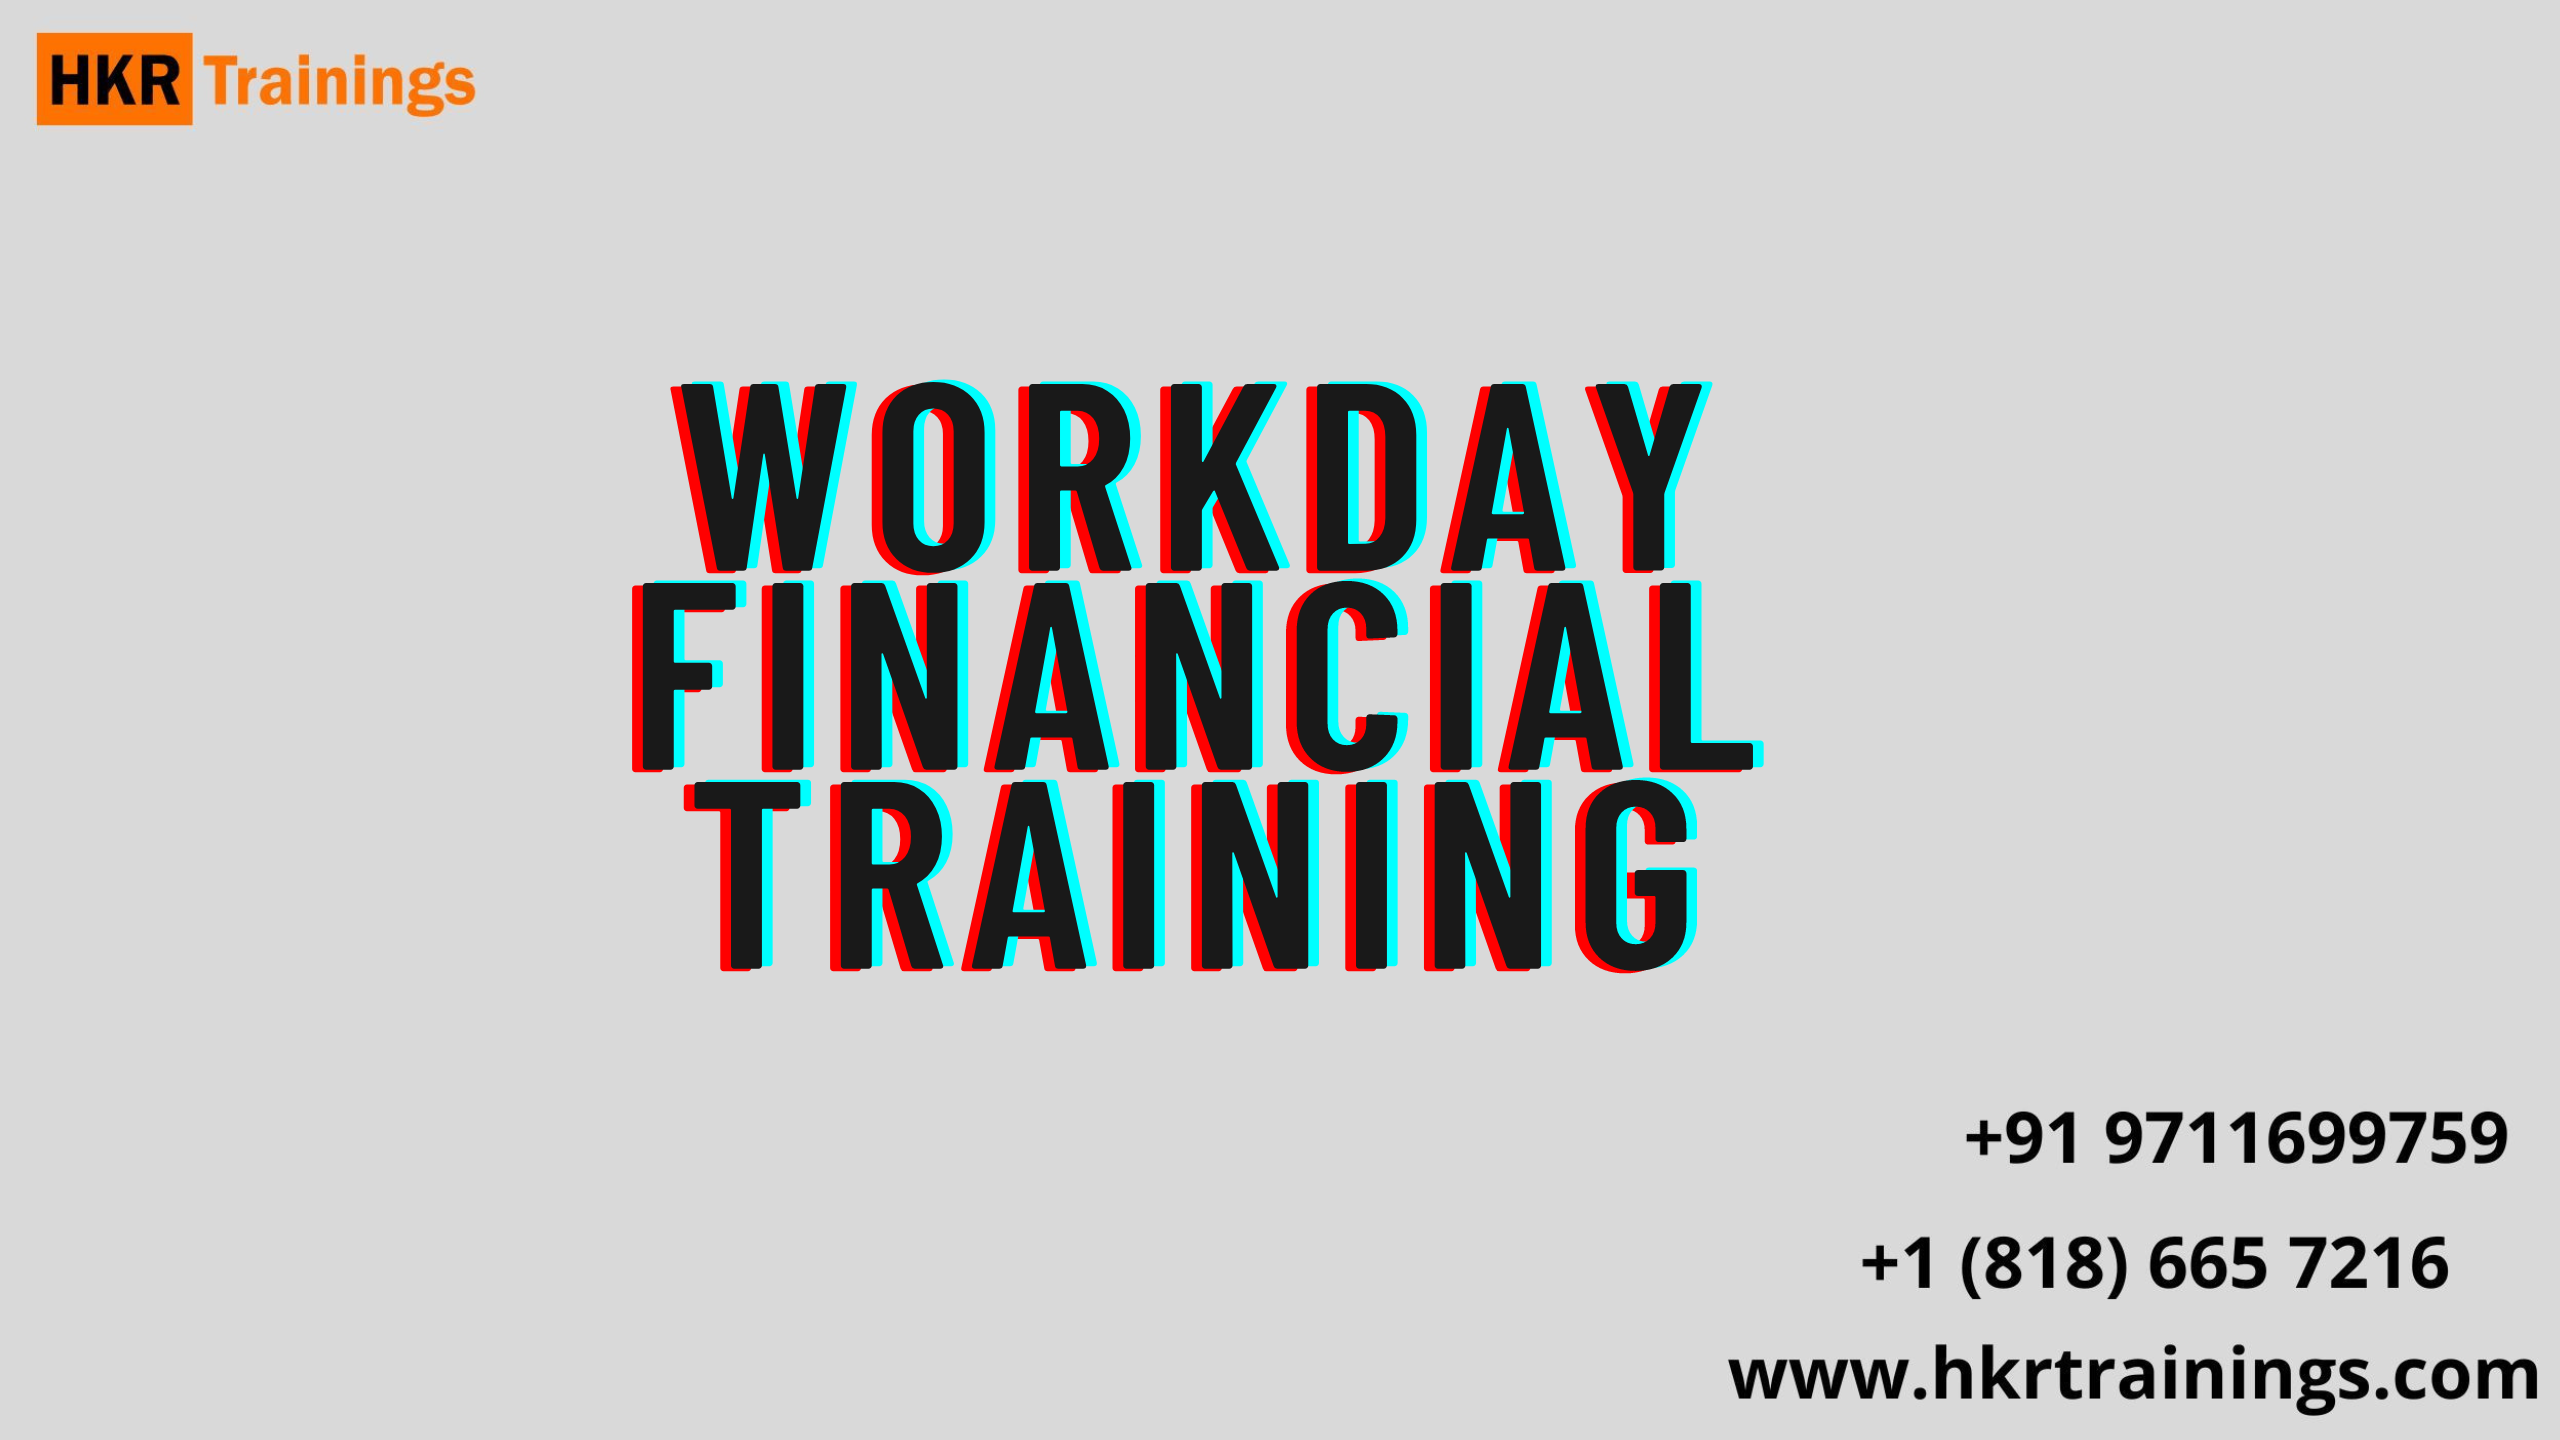 Get Your Dream Job With Our Workday Financials Training, Online Event